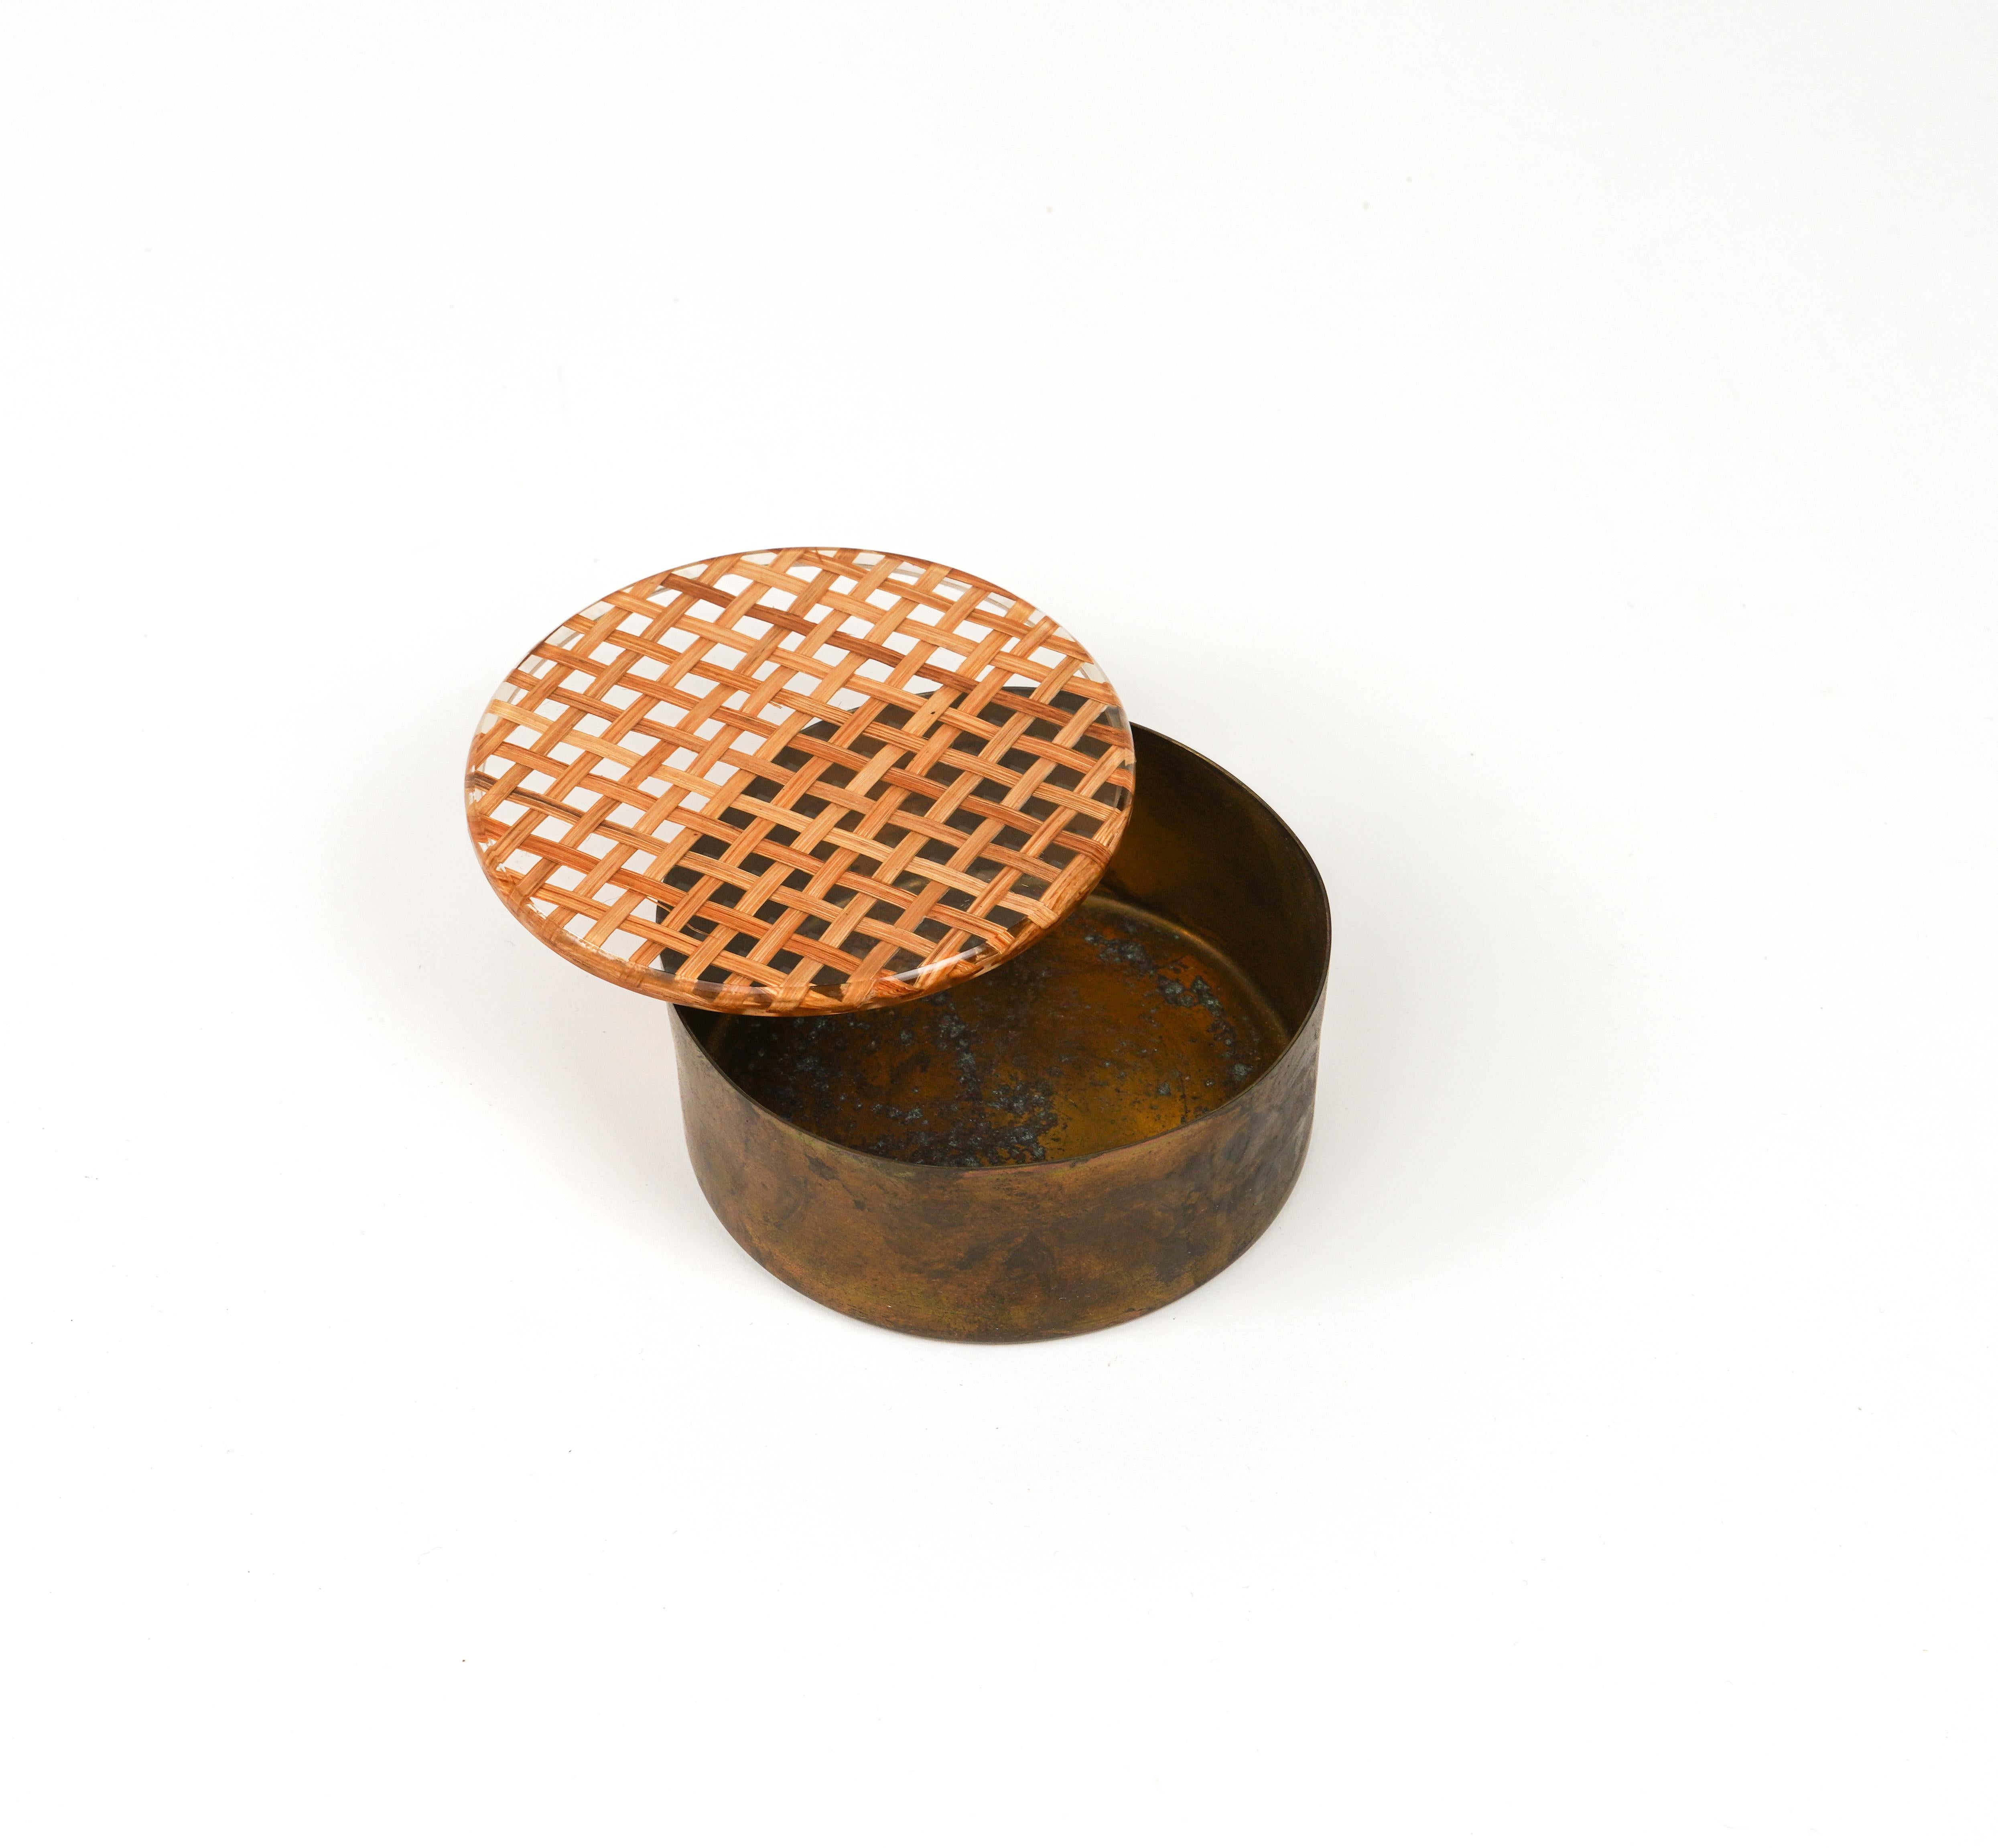 Midcentury Round Box in Brass, Lucite & Rattan Christian Dior Style, Italy 1970s For Sale 1